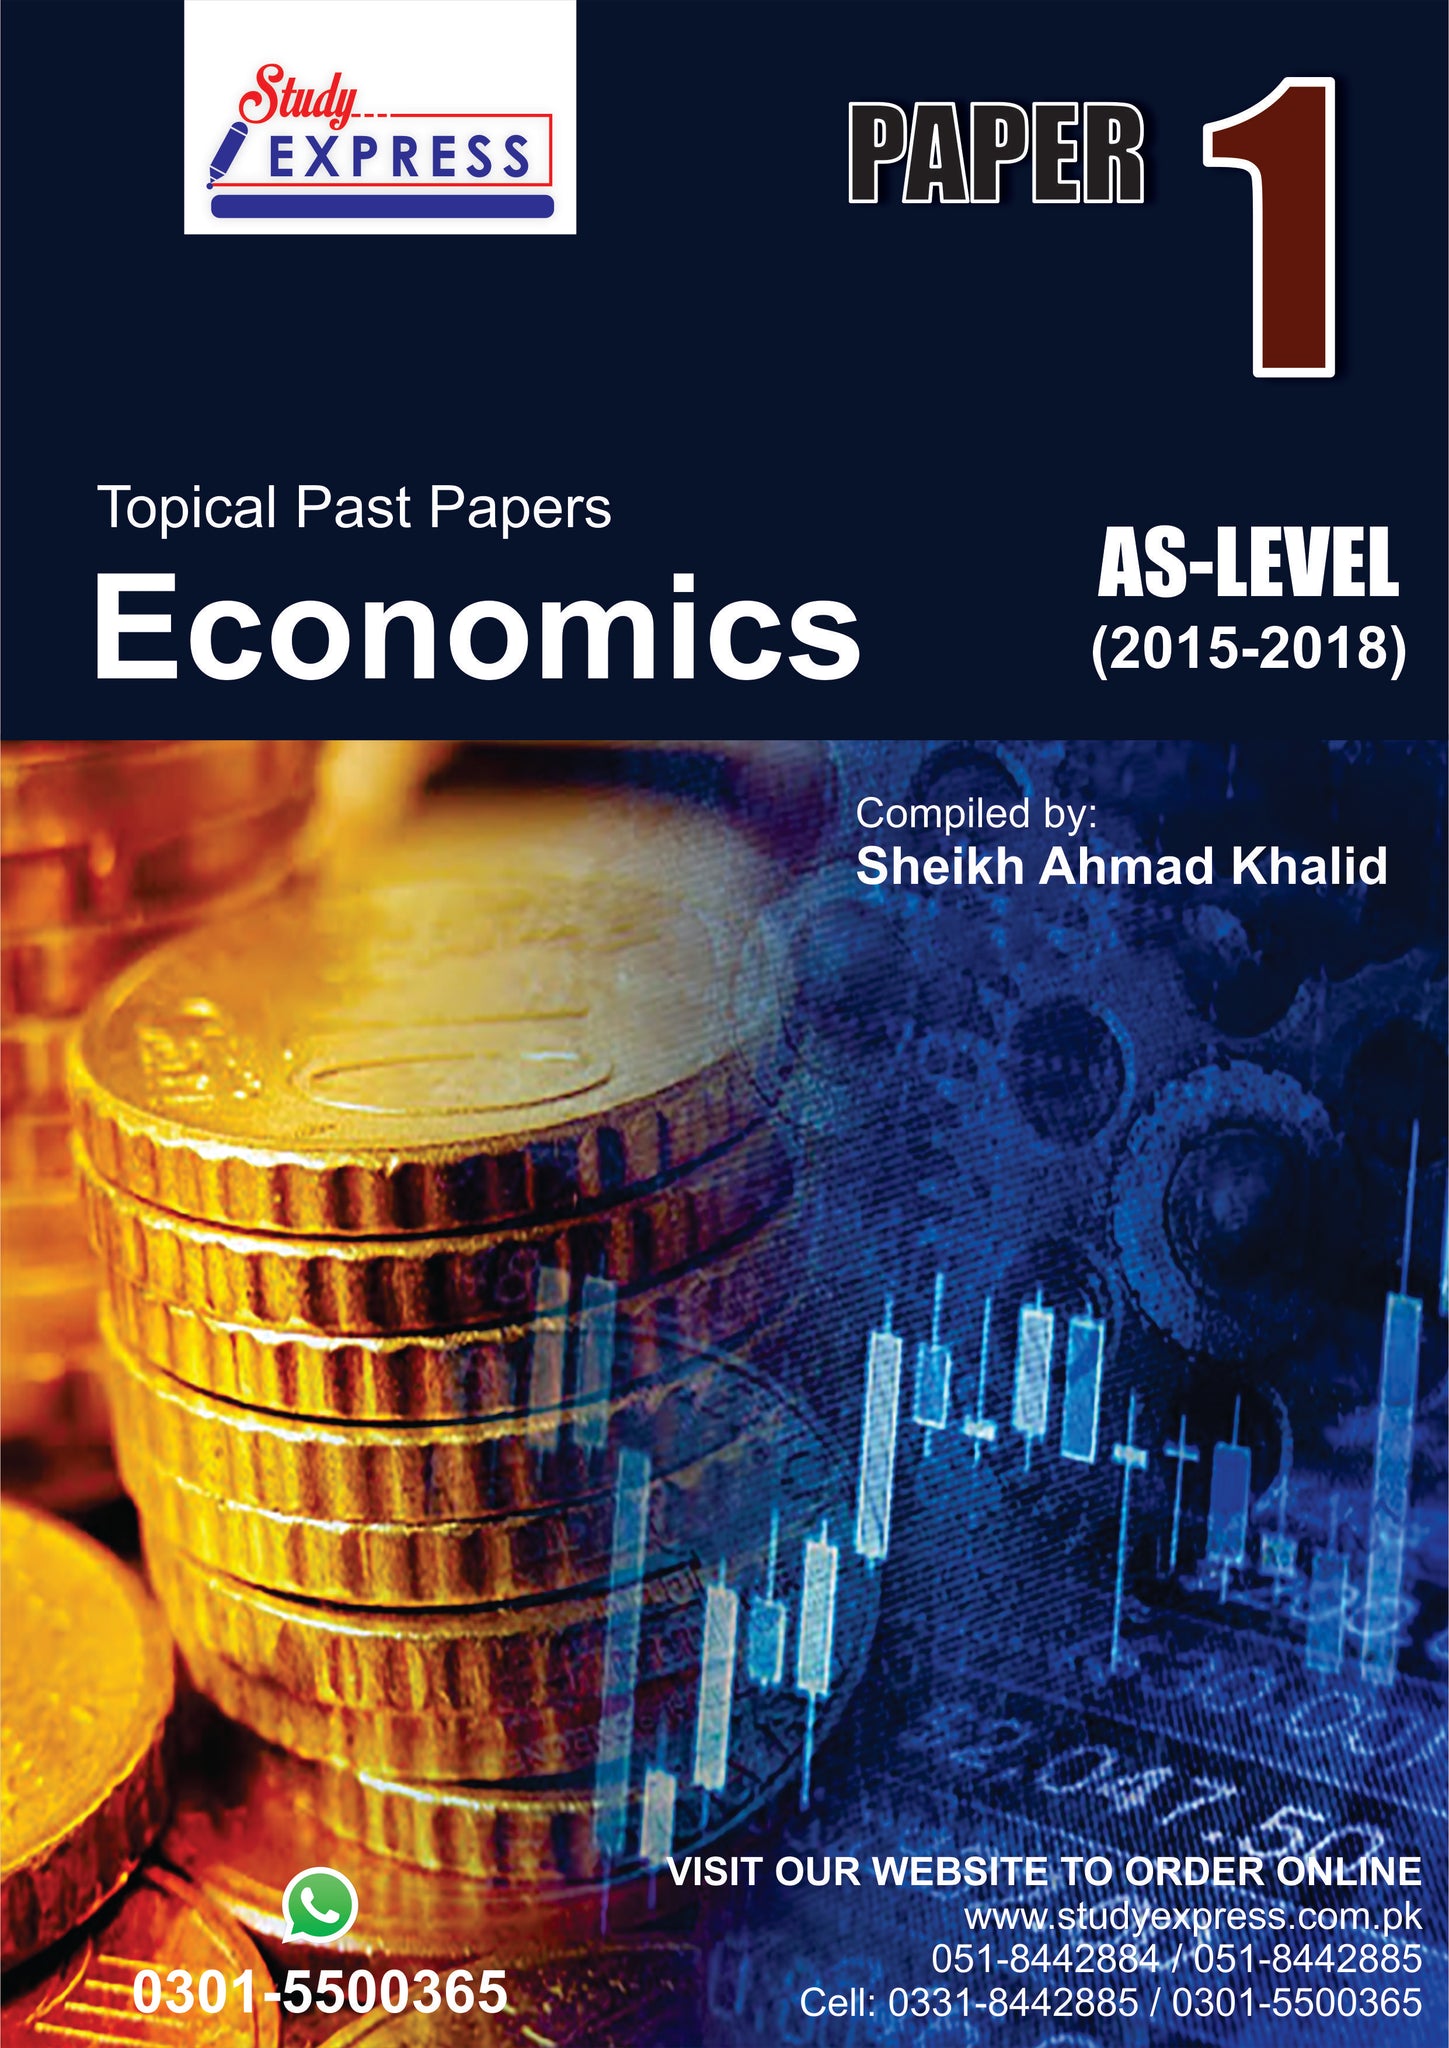 AS-LEVEL TOPICAL ECONOMICS PAPER 1 (2015-2018) Compiled by: SHEIKH AHMAD KHALID